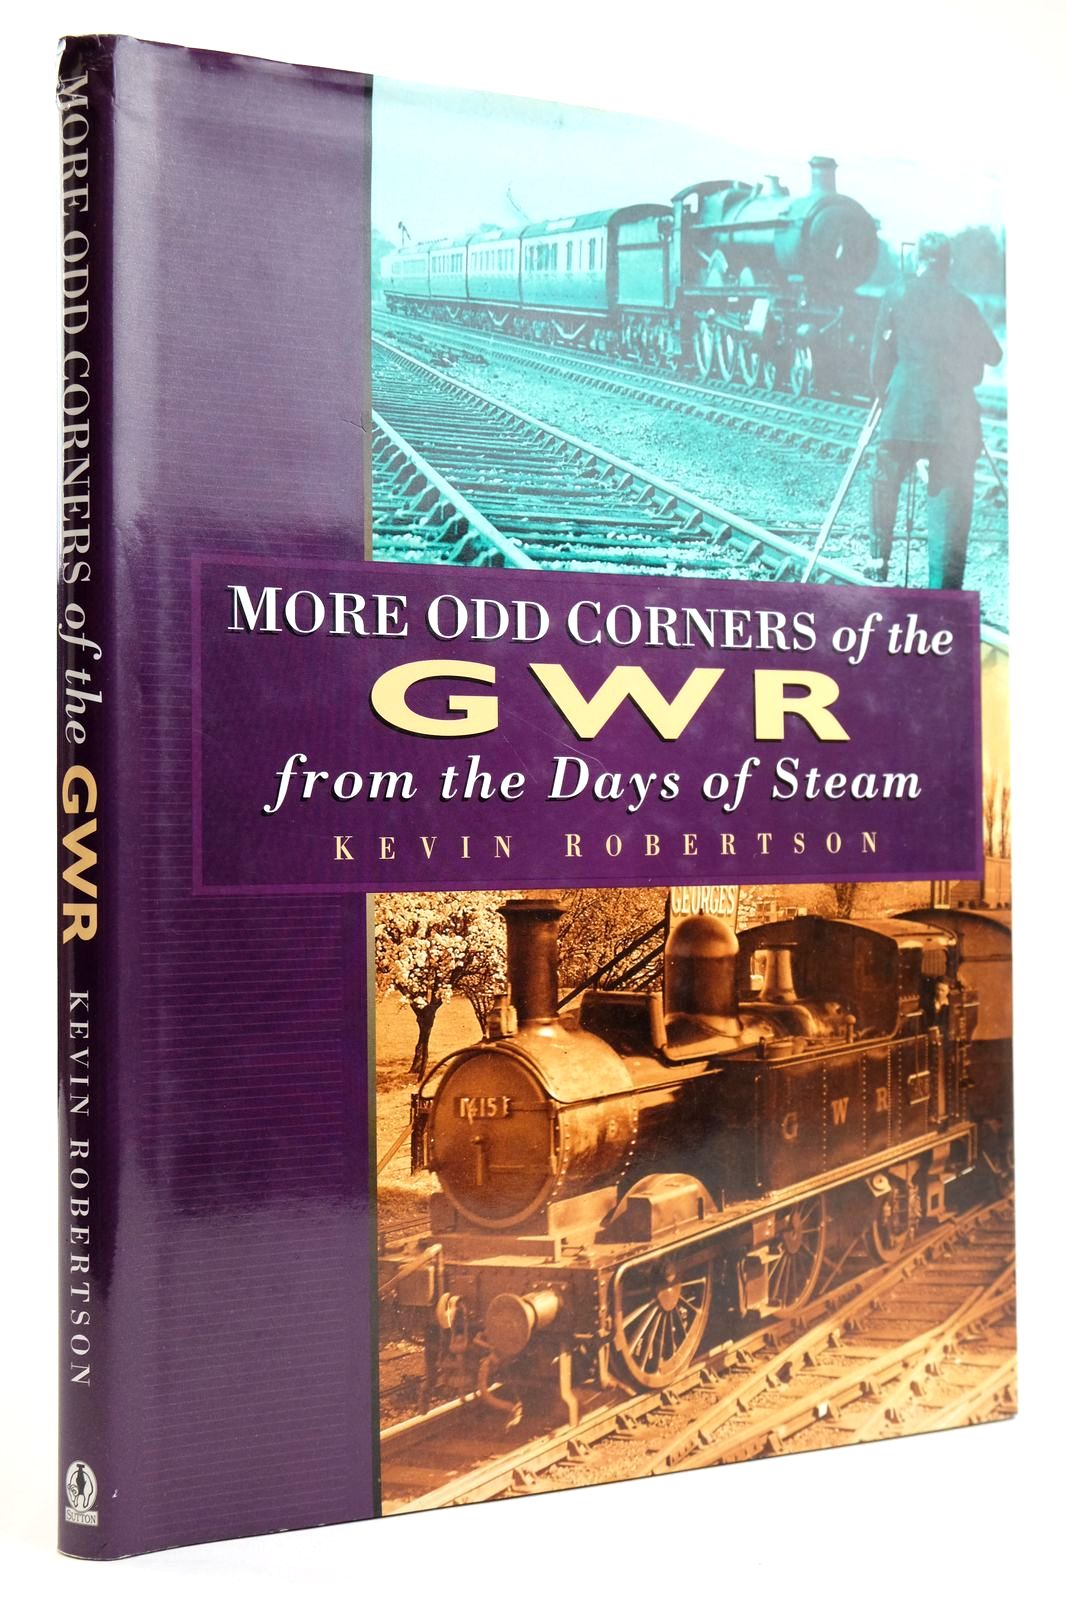 Photo of MORE ODD CORNERS OF THE GWR FROM THE DAYS OF STEAM written by Robertson, Kevin published by Sutton Publishing (STOCK CODE: 2133549)  for sale by Stella & Rose's Books